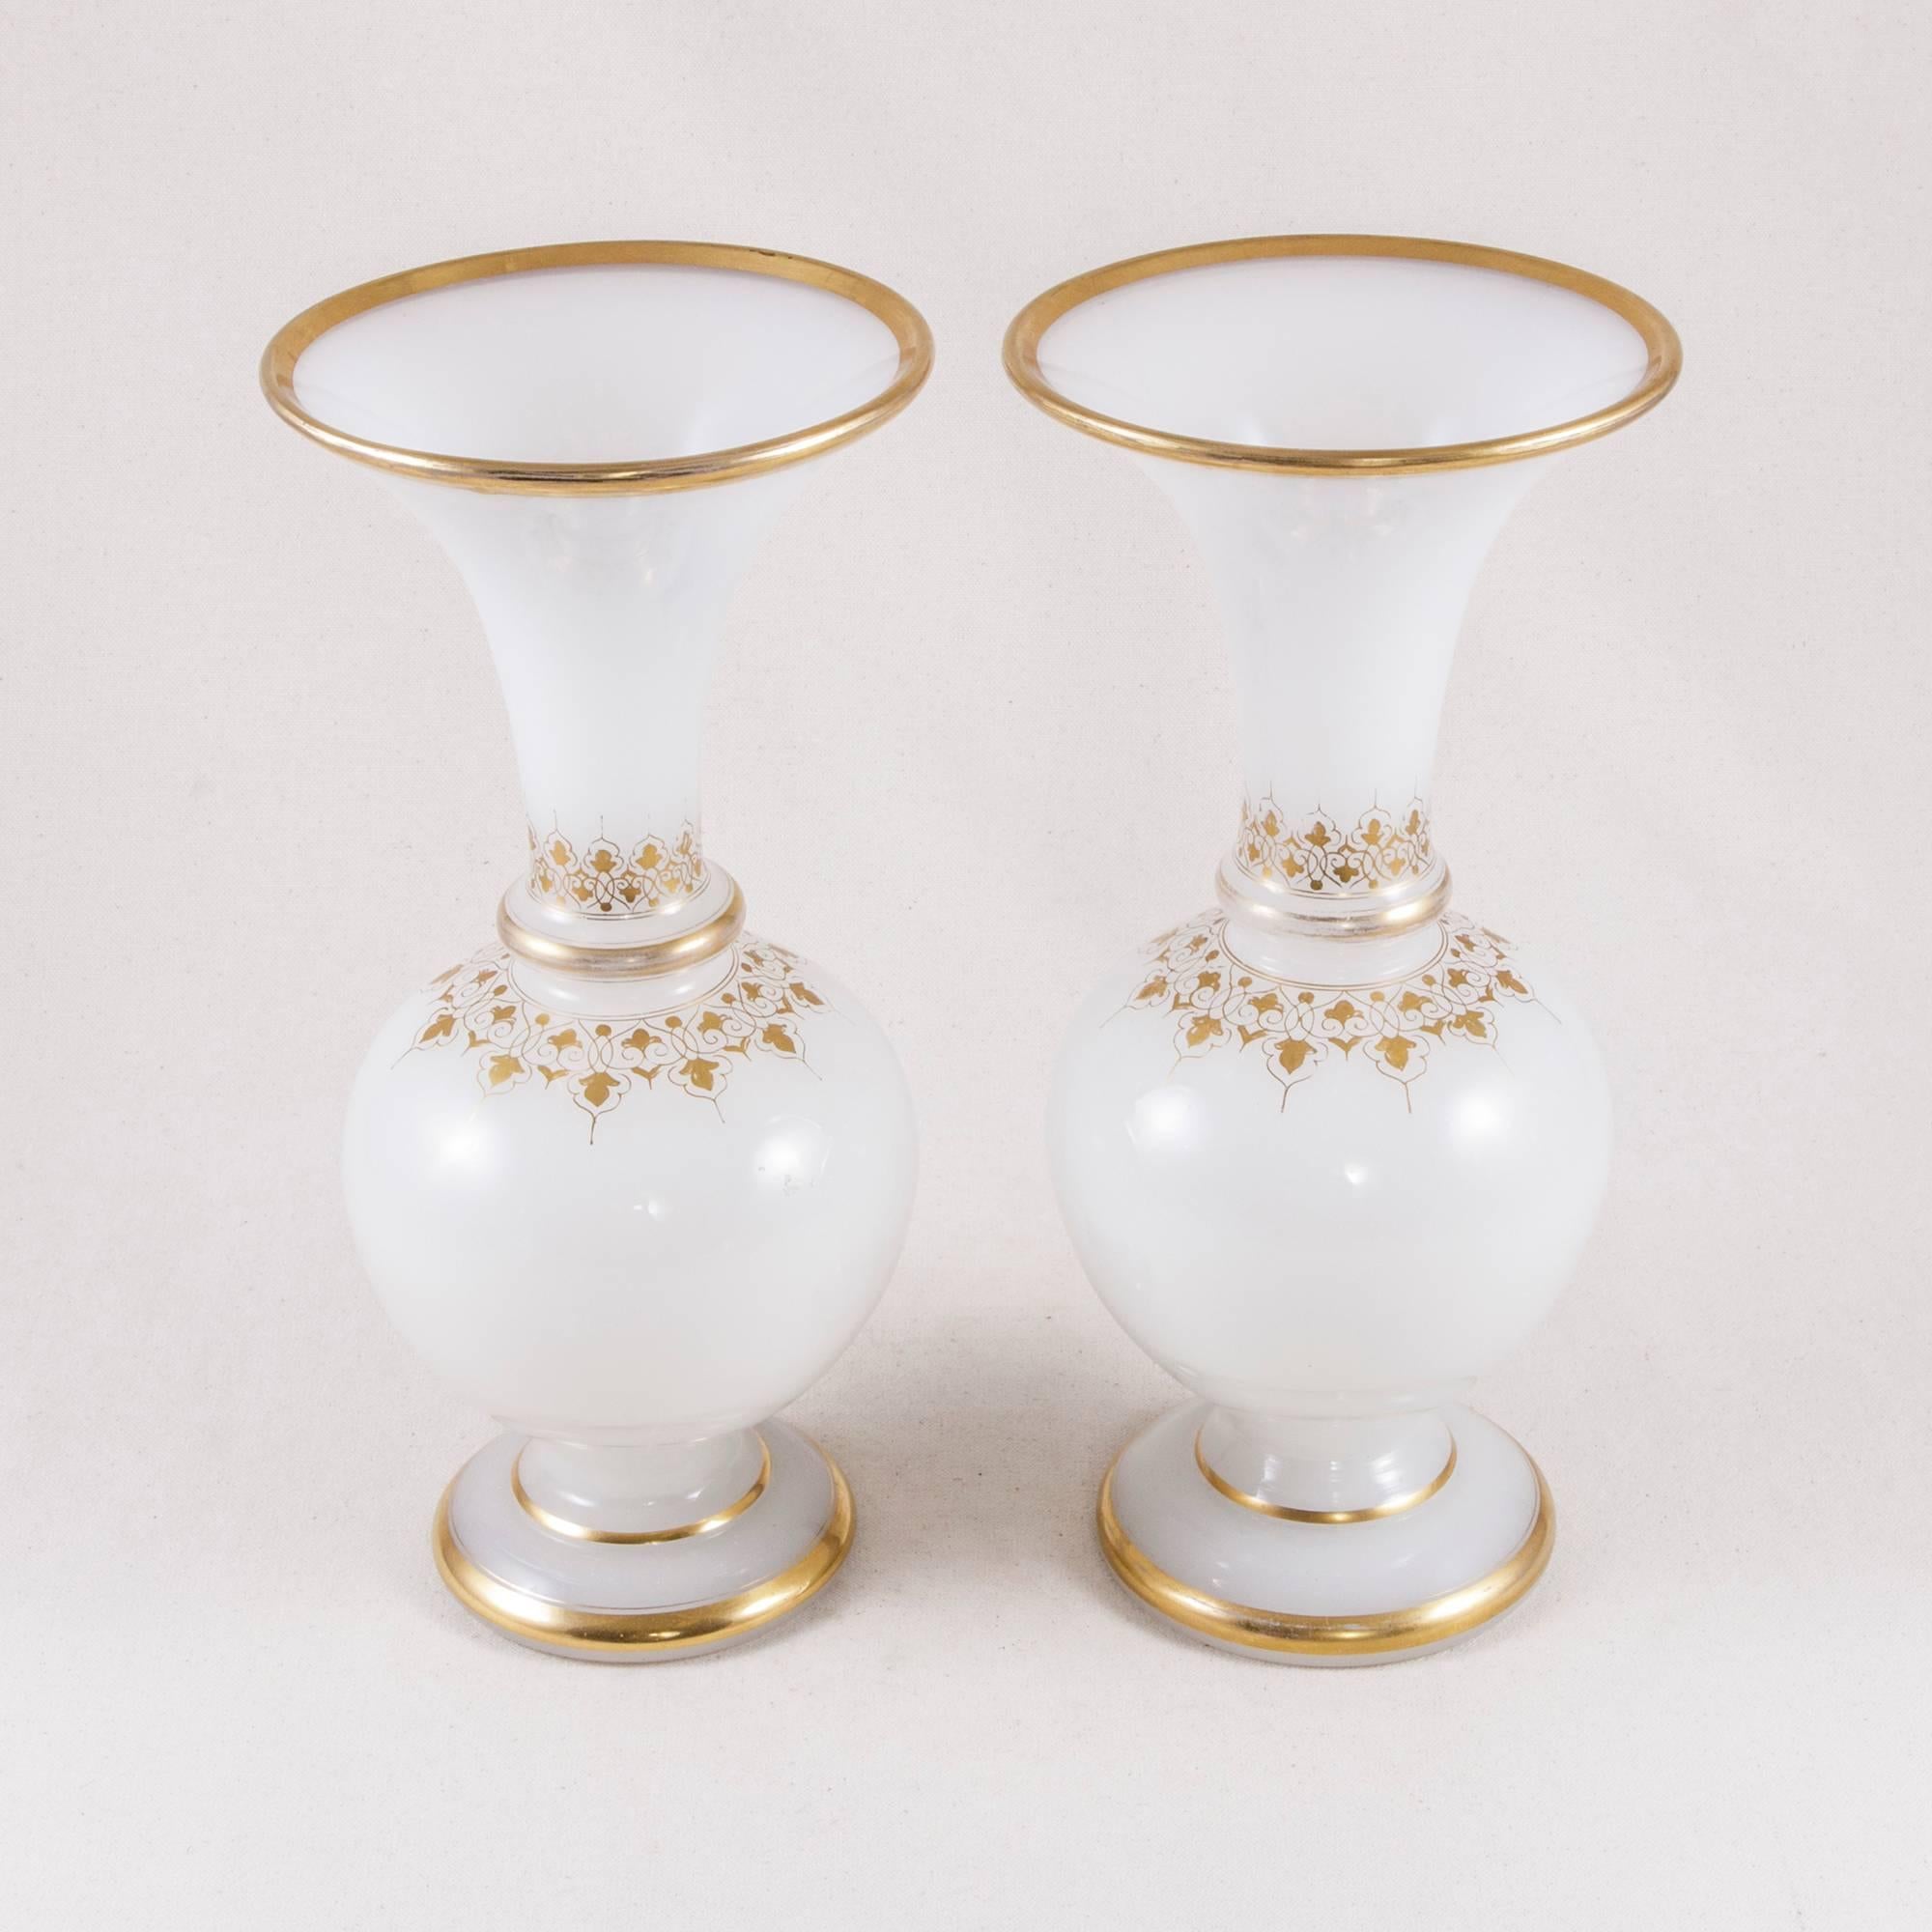 This turn of the century pair of French opaline vases with hand-painted gilding features a delicate pattern of intertwining grape leaves and vines. Accents of hand-painted gold bands around the upper rim are mirrored at the base, adding to the regal